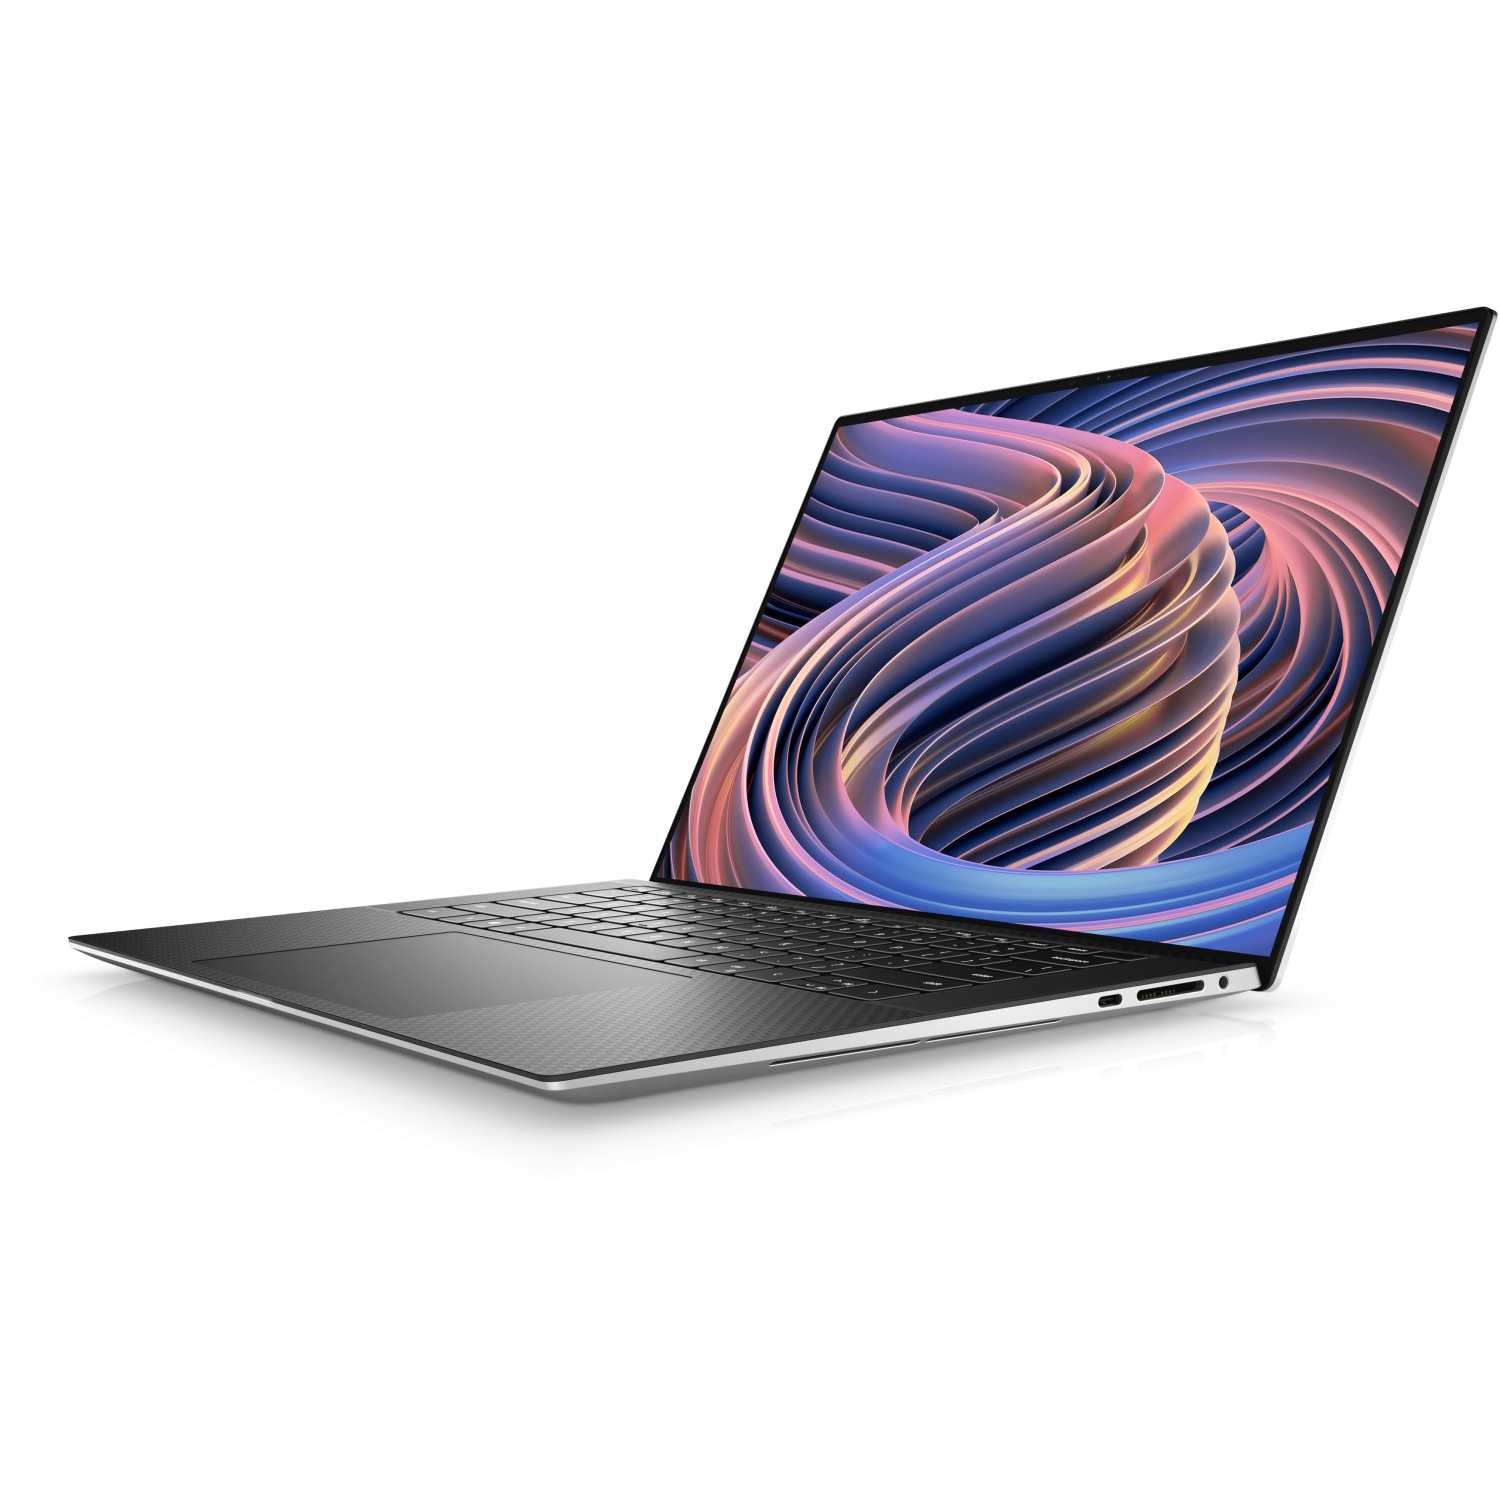 Refurbished (Excellent) – Dell XPS 9520 Laptop (2022) | 15.6" FHD+ | Core i7 - 1TB SSD - 24GB RAM - RTX 3050 | 14 Cores @ 4.7 GHz - 12th Gen CPU